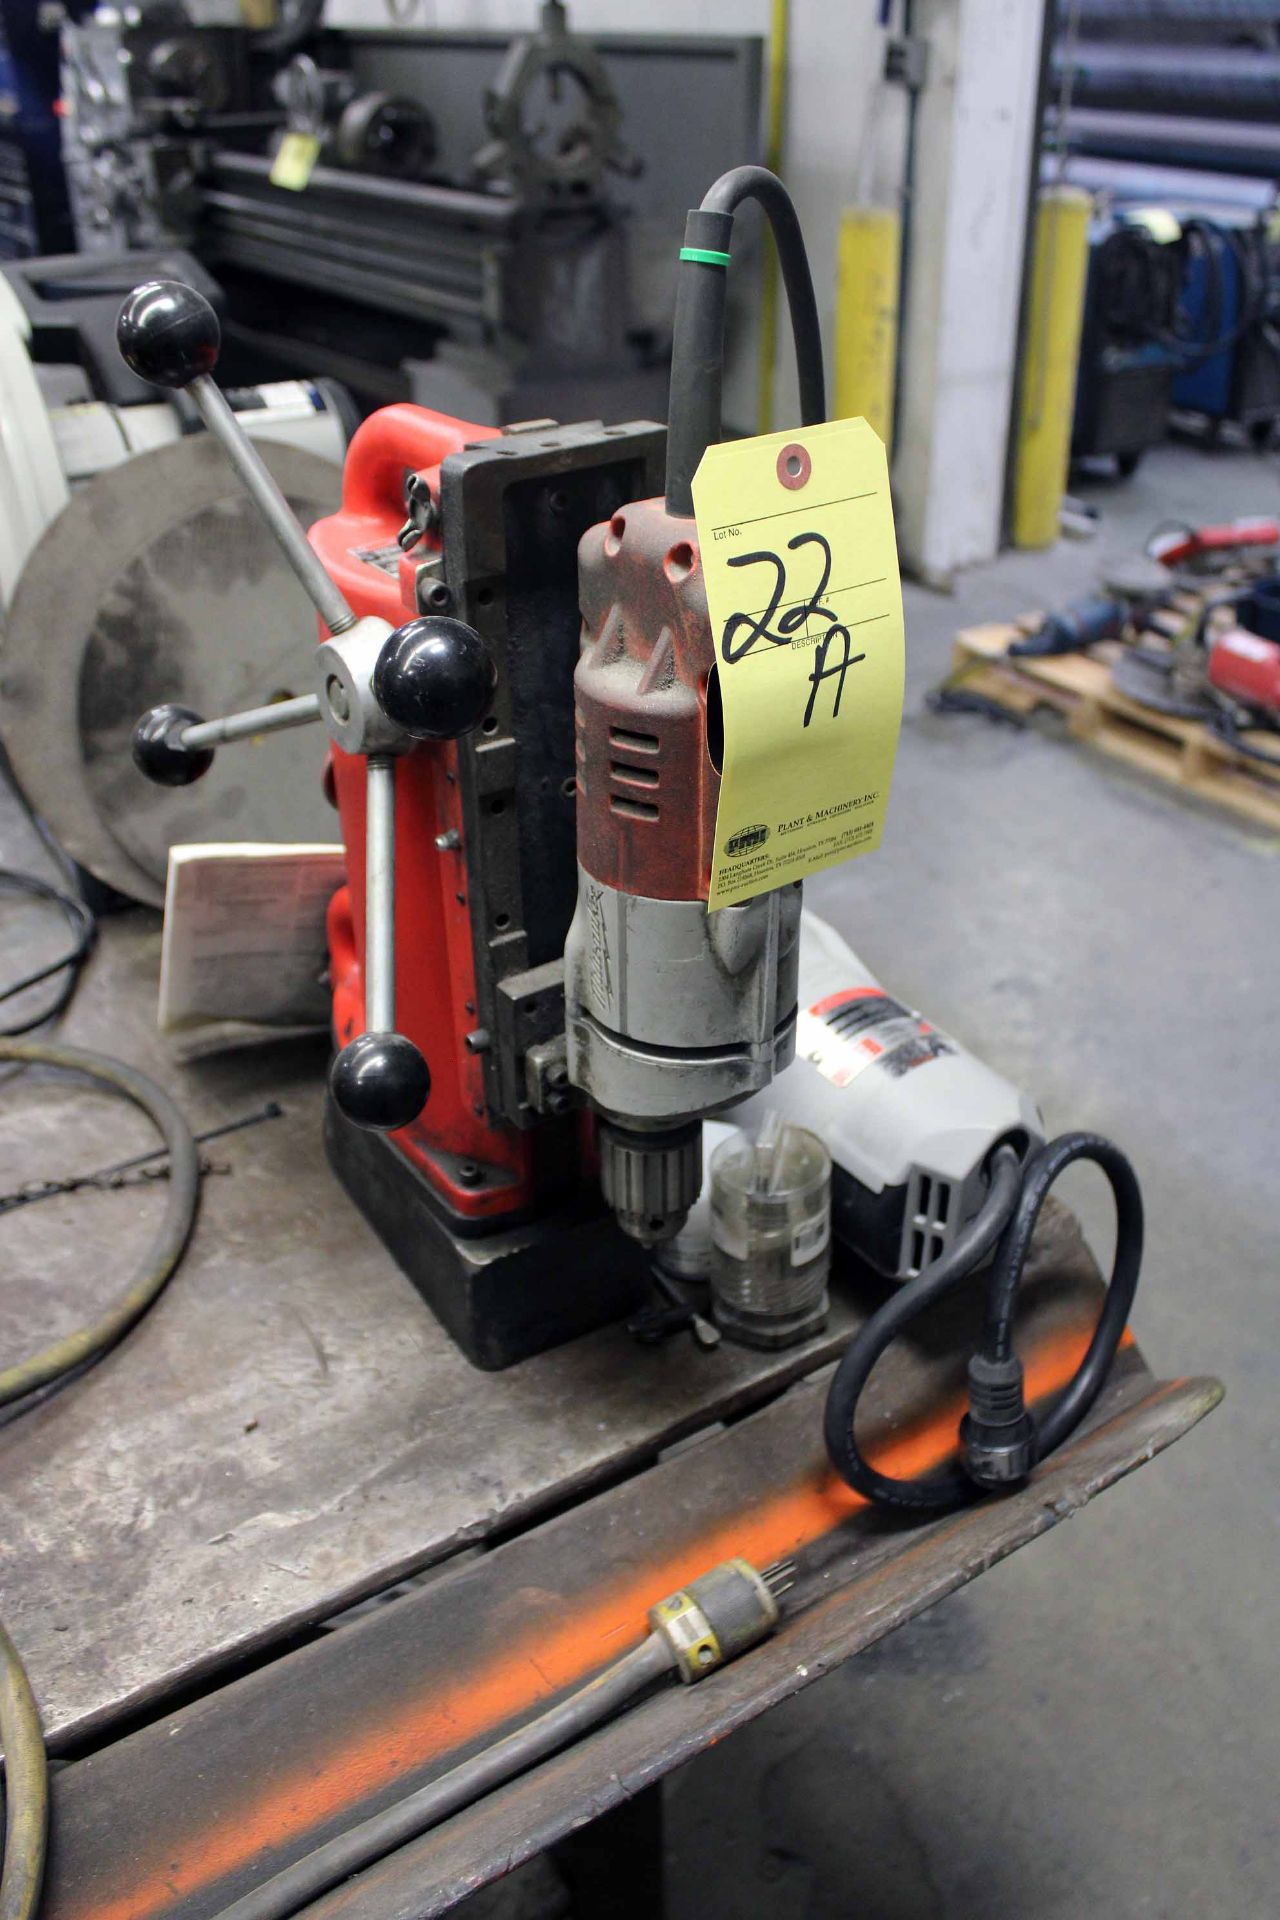 MAGNETIC BASE DRILL, MILWAUKEE MDL. 4203, 11"L. X 17-1/4" ht.